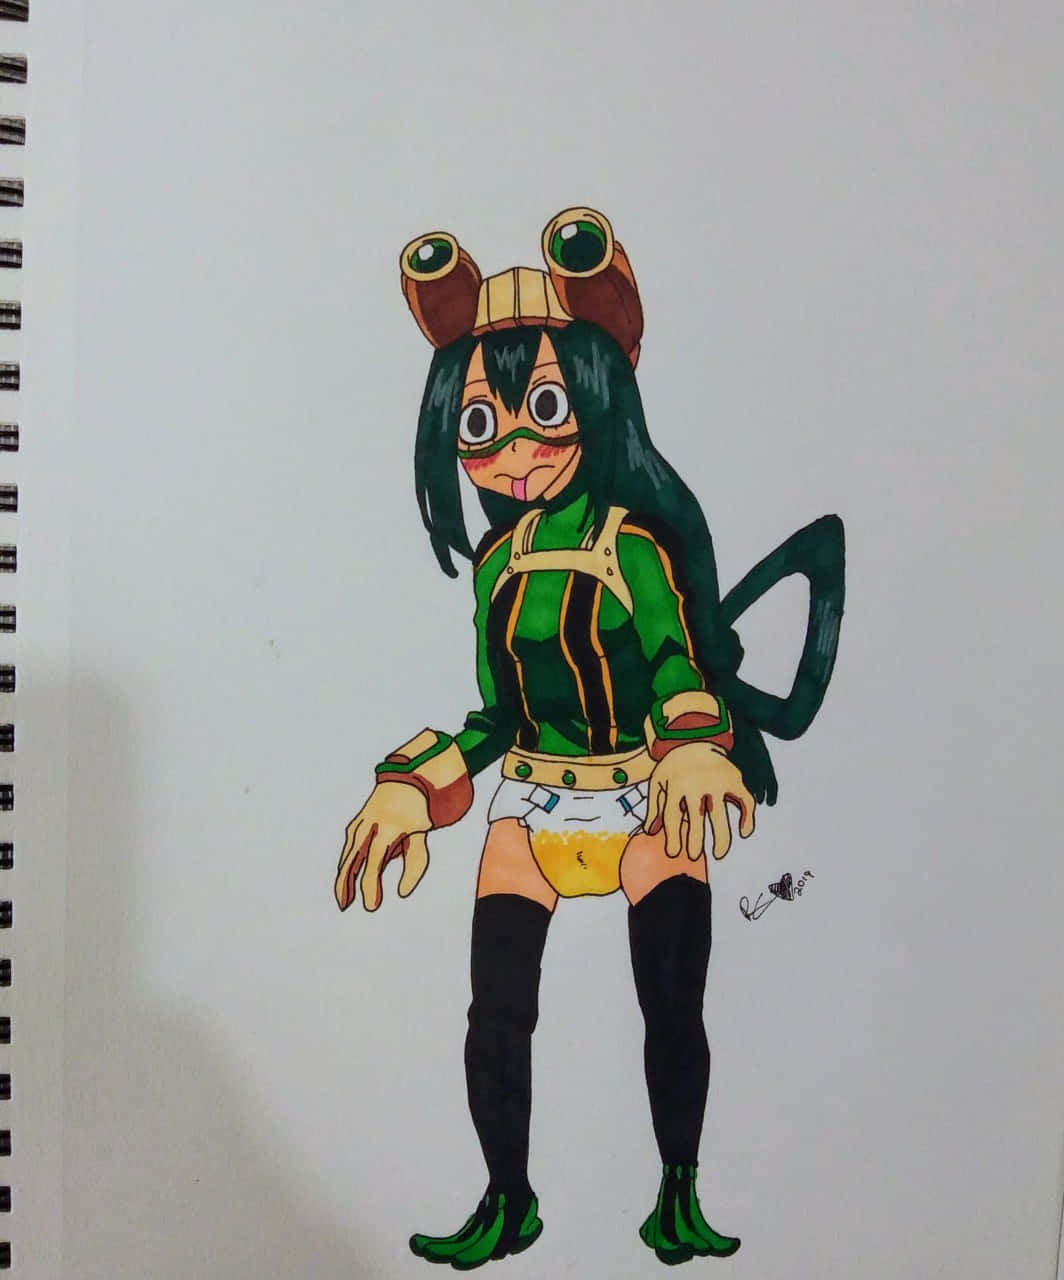 Enjoy Nature's Beauty with Froppy